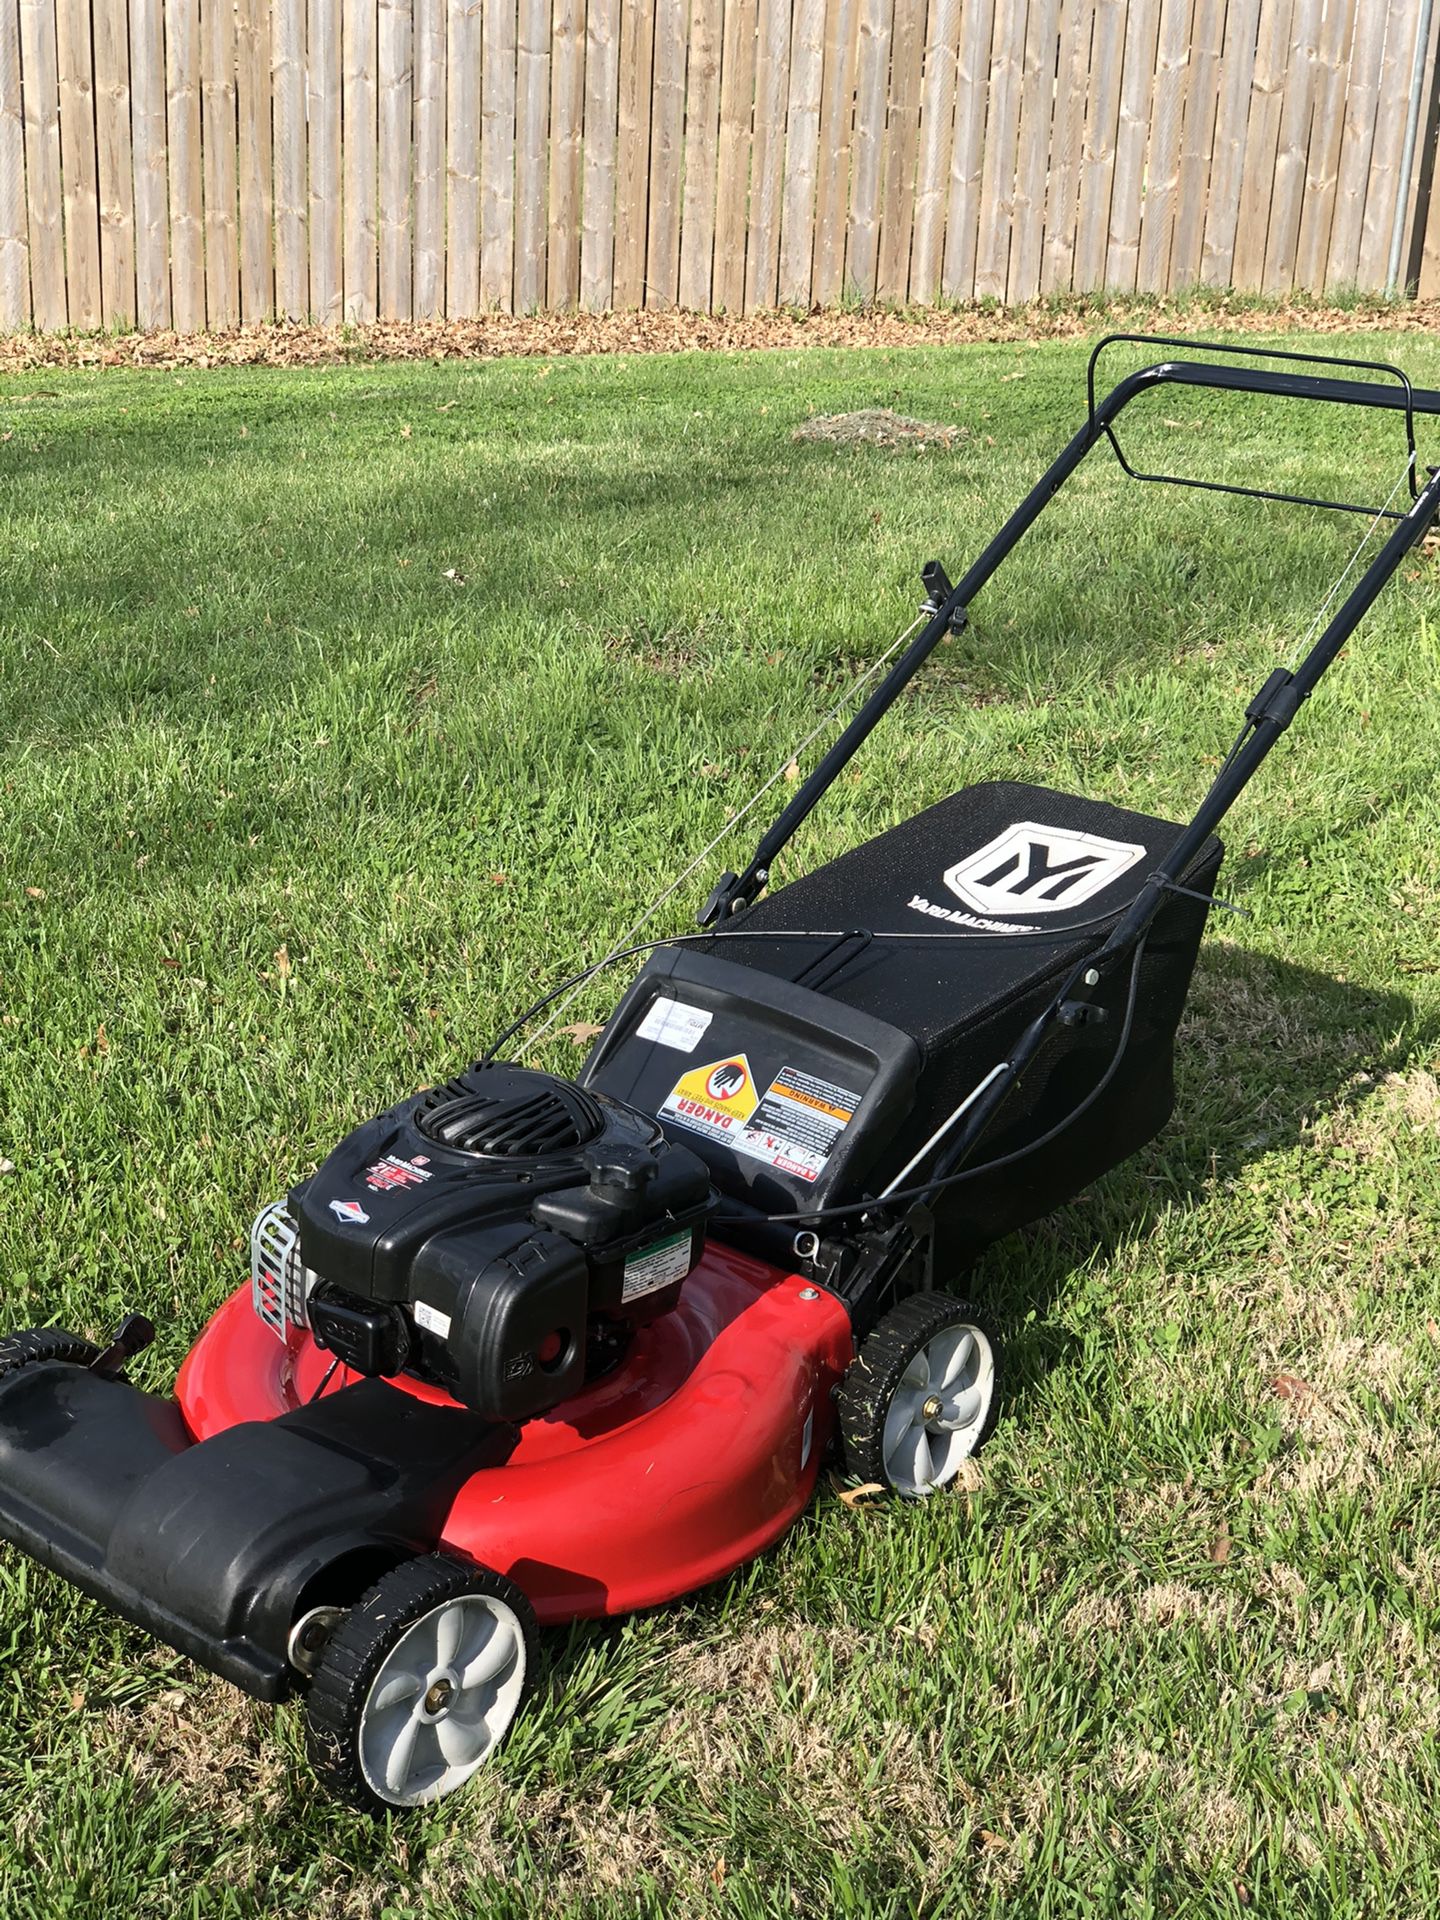 Yard machines 21” MTD with bag self propelled lawn mower in good working condition.